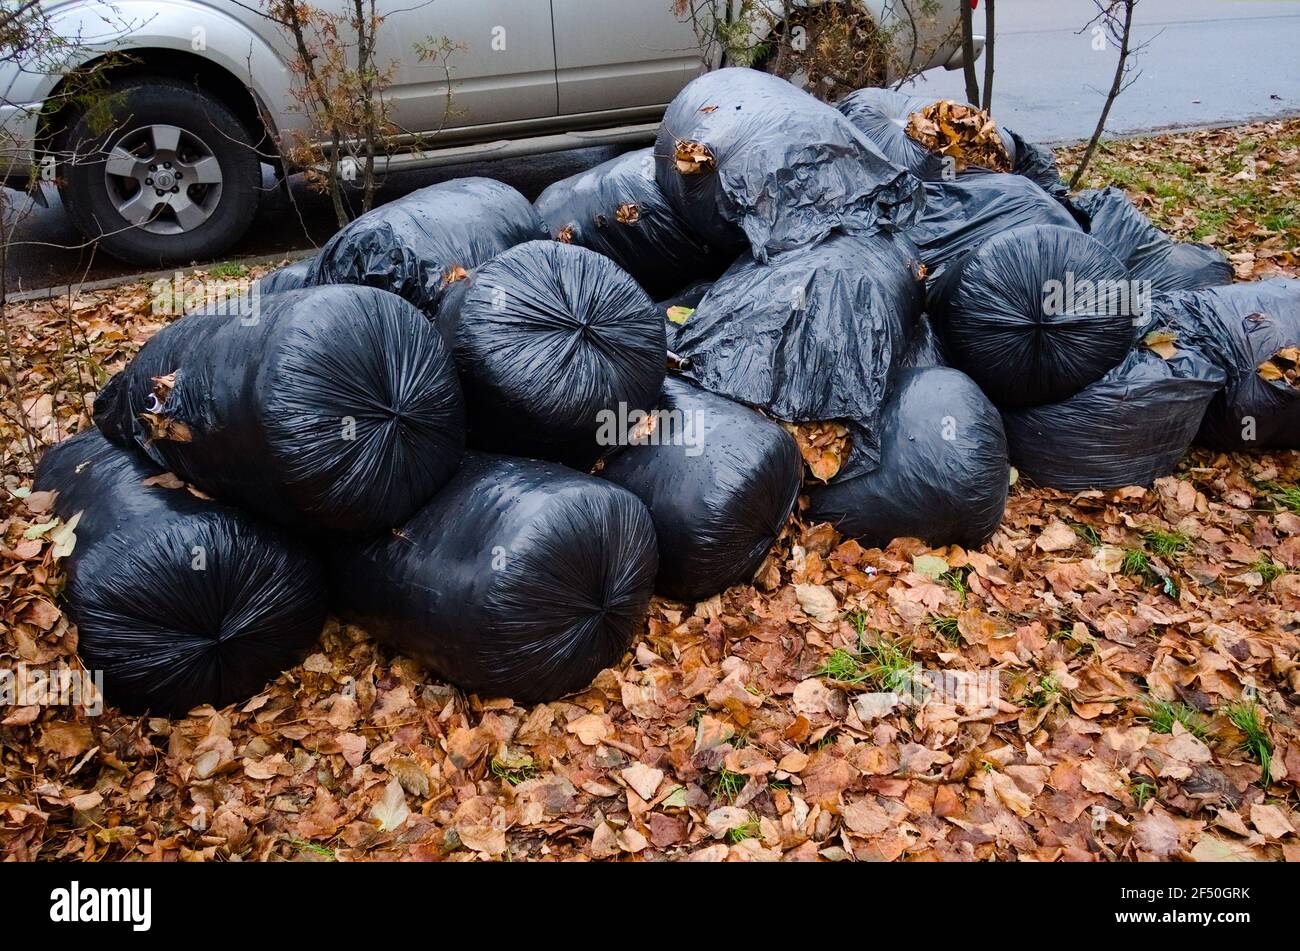 Garbage Big Black Plastic Bags Nature Forest River Spring Cleaning Stock  Photo by ©vitalii.kyrychuk@gmail.com 334233066